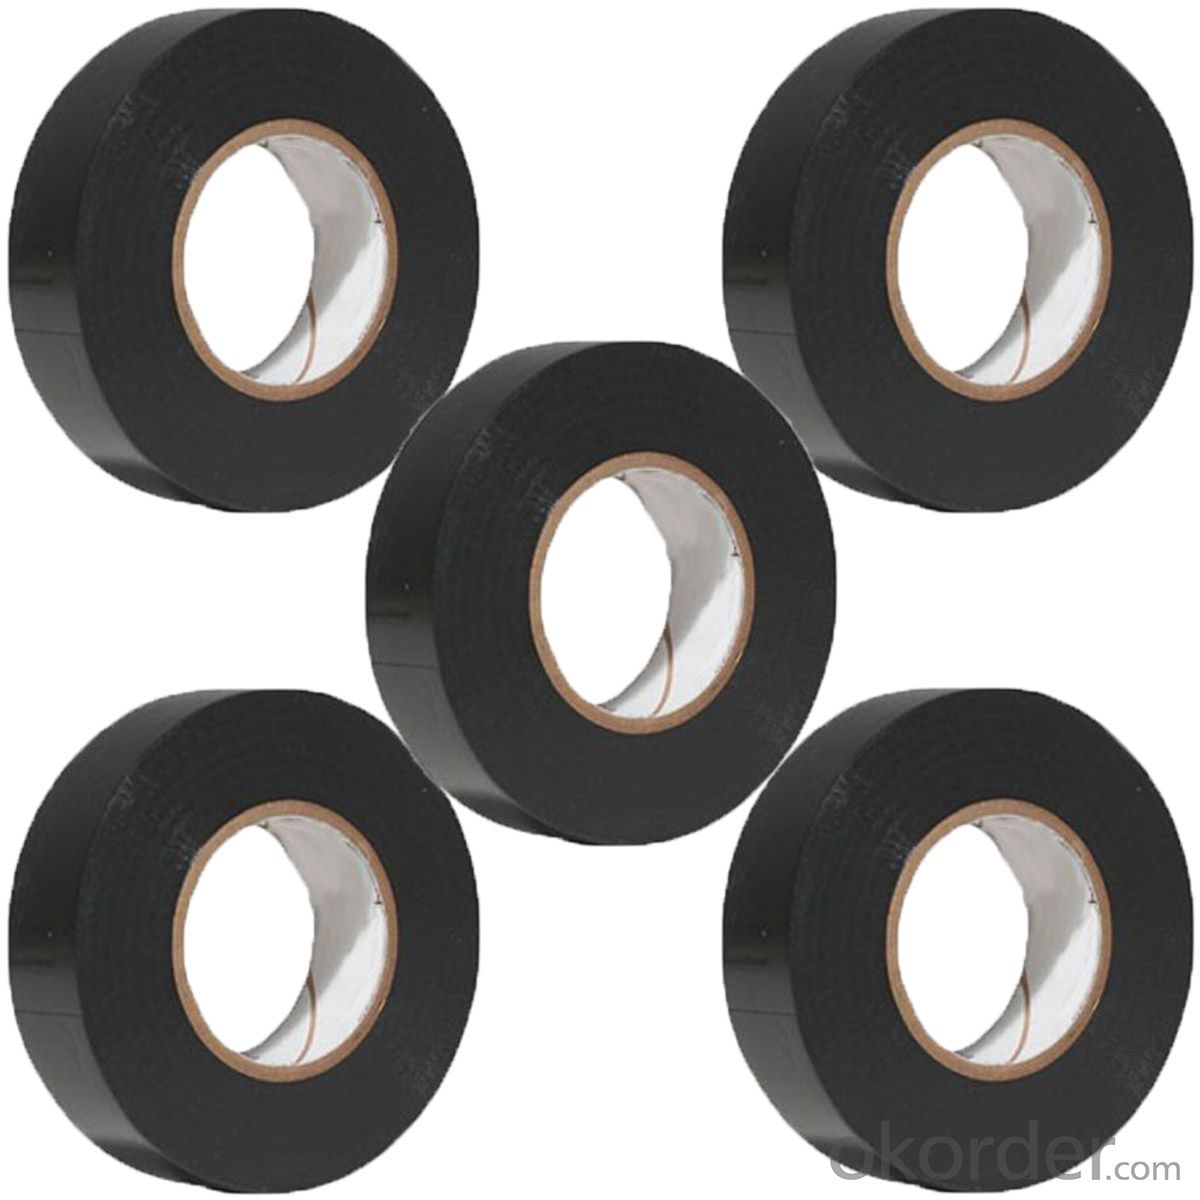 Color  Black  PVC  Pipe  Wrapping   Tape